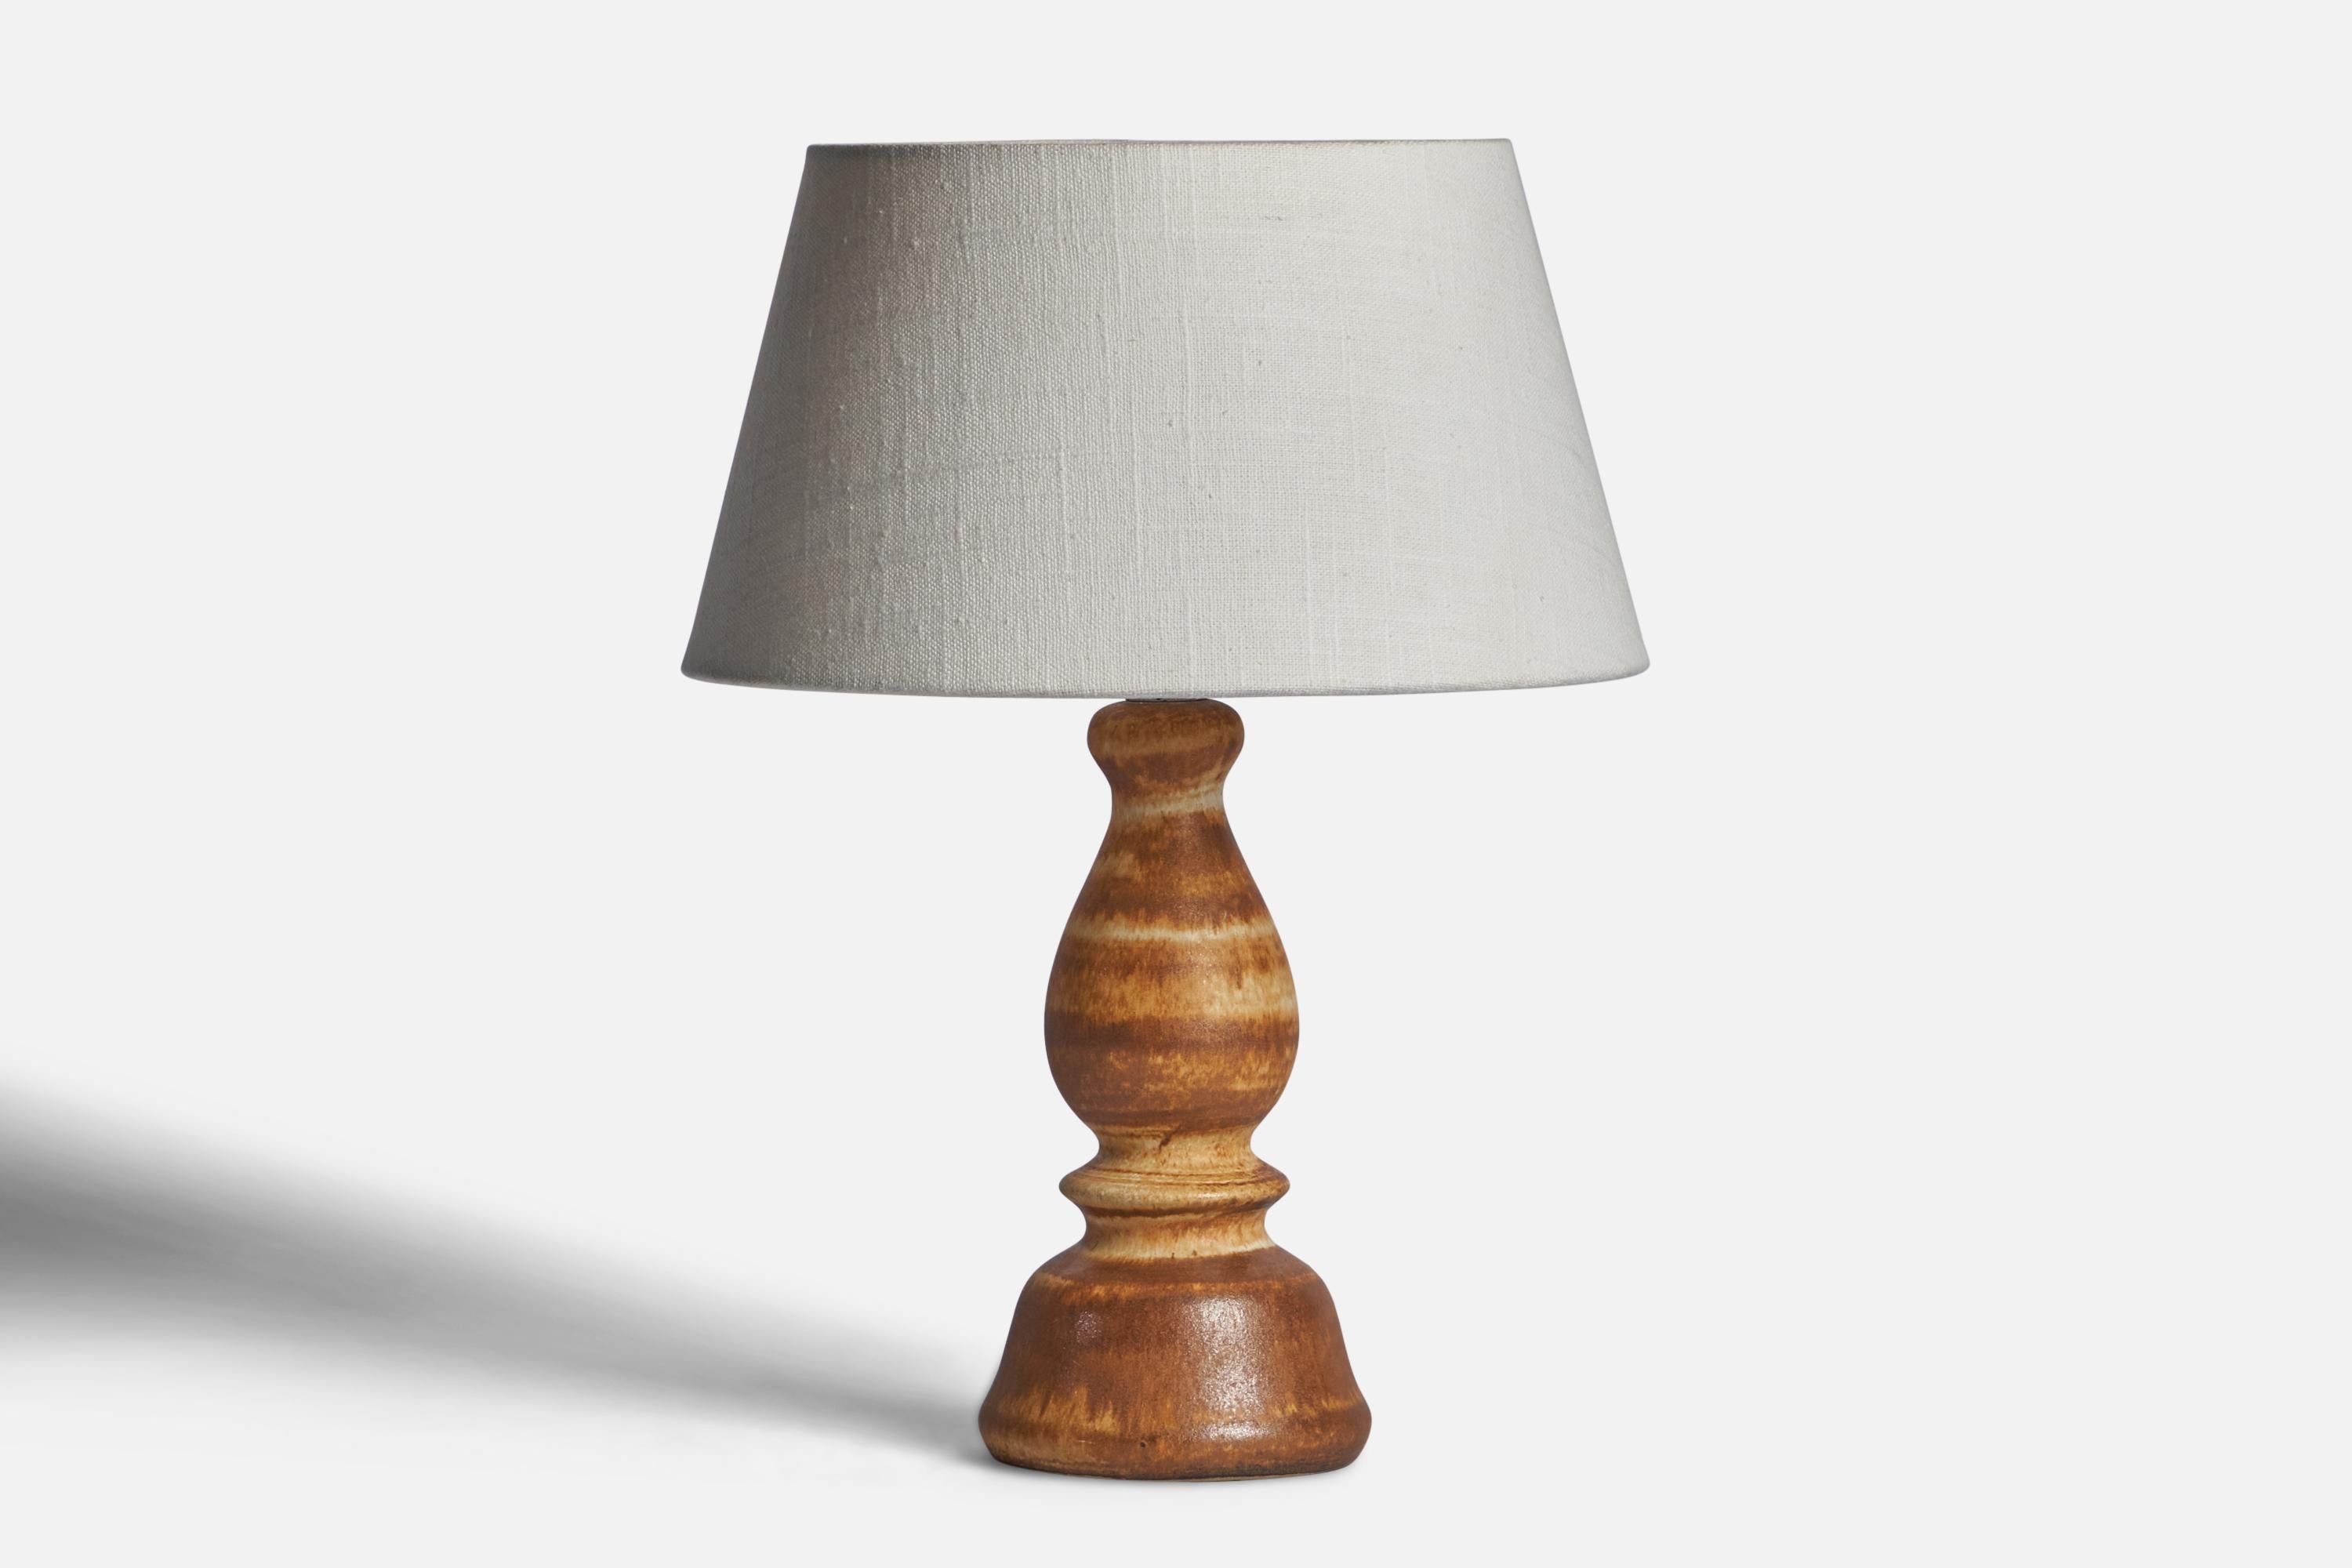 A brown and beige-glazed table lamp designed by Bruno Karlsson and produced by Ego Stengods, Sweden, 1960s.

Dimensions of Lamp (inches): 10.85” H x 4.15” Diameter
Dimensions of Shade (inches): 7” Top Diameter x 10” Bottom Diameter x